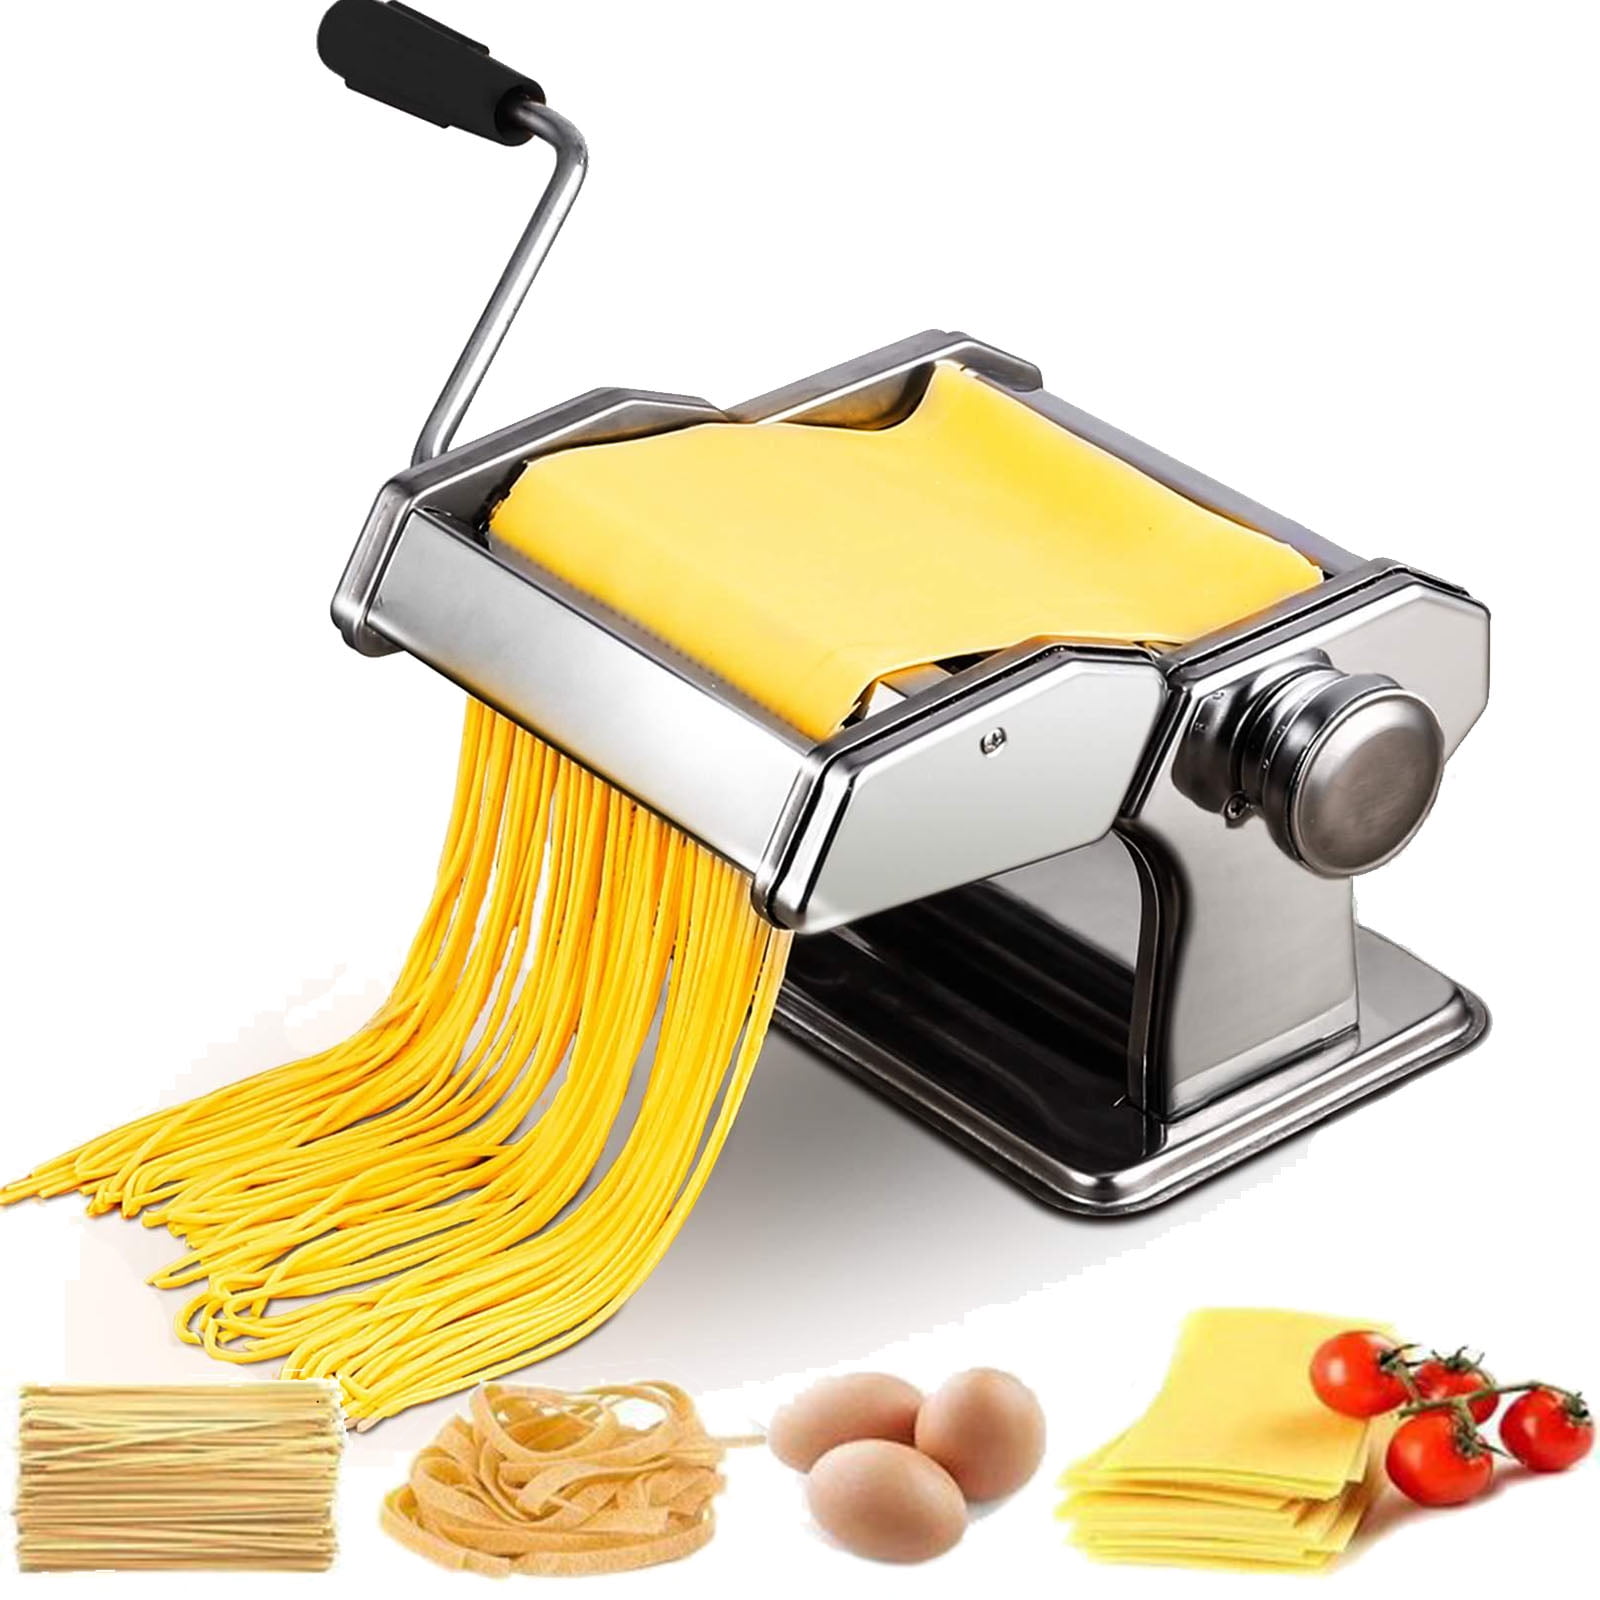 Kitchen Multi-Function Manual Noodle Press Machine Stainless Steel Small  Pasta Maker With 2/3 Cutting Blades, Suitable For Dumpling And Wonton Skin